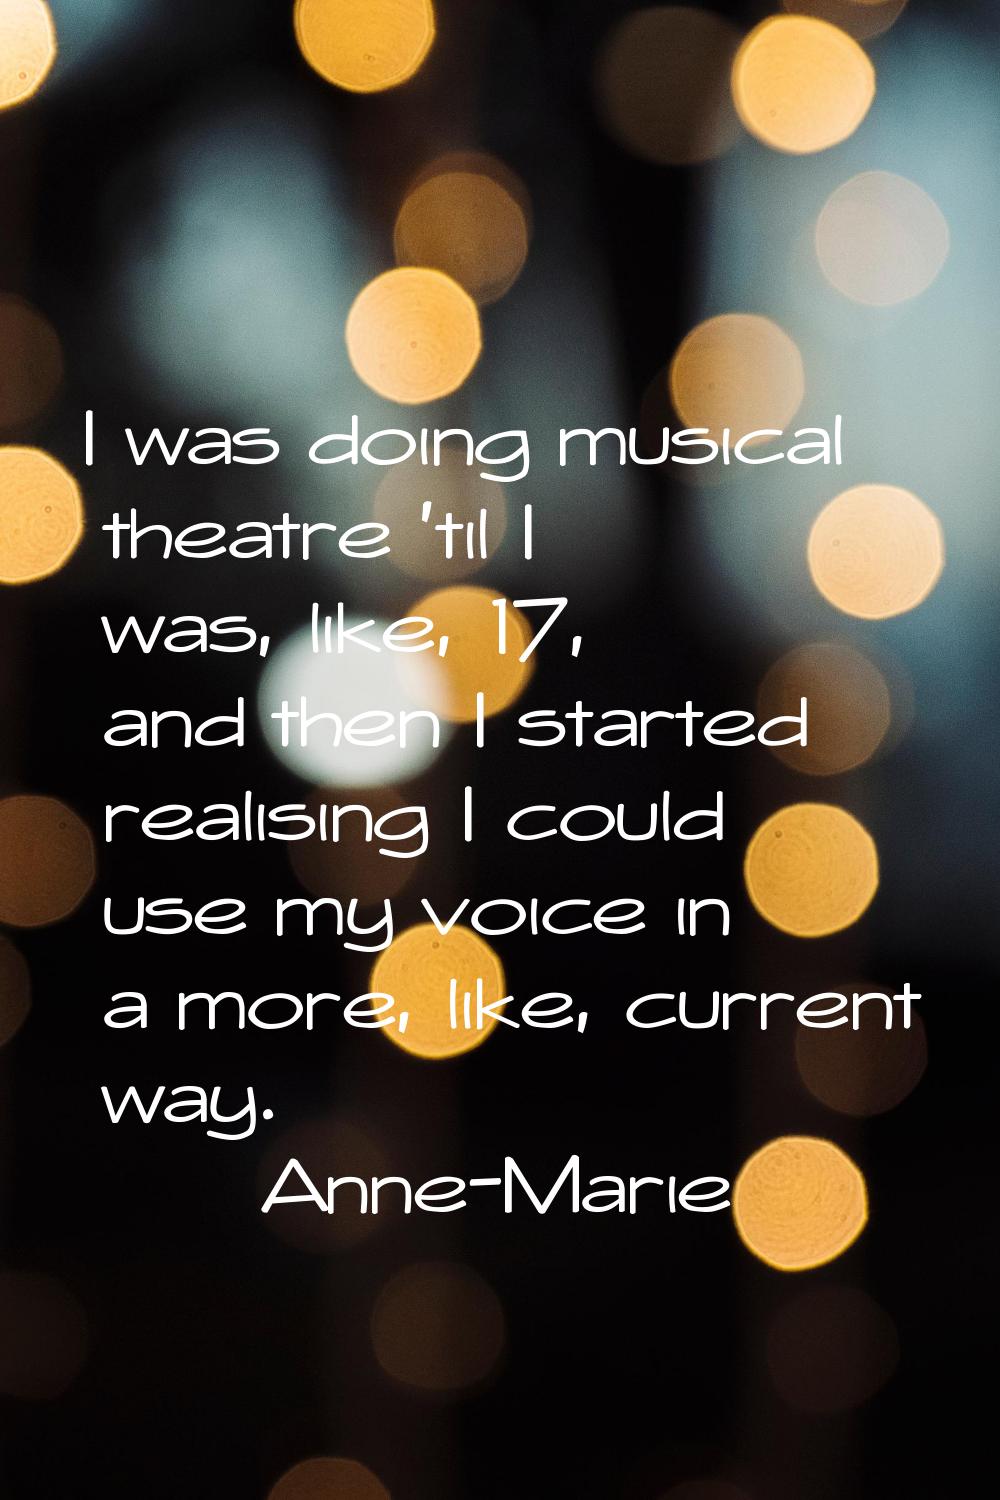 I was doing musical theatre 'til I was, like, 17, and then I started realising I could use my voice